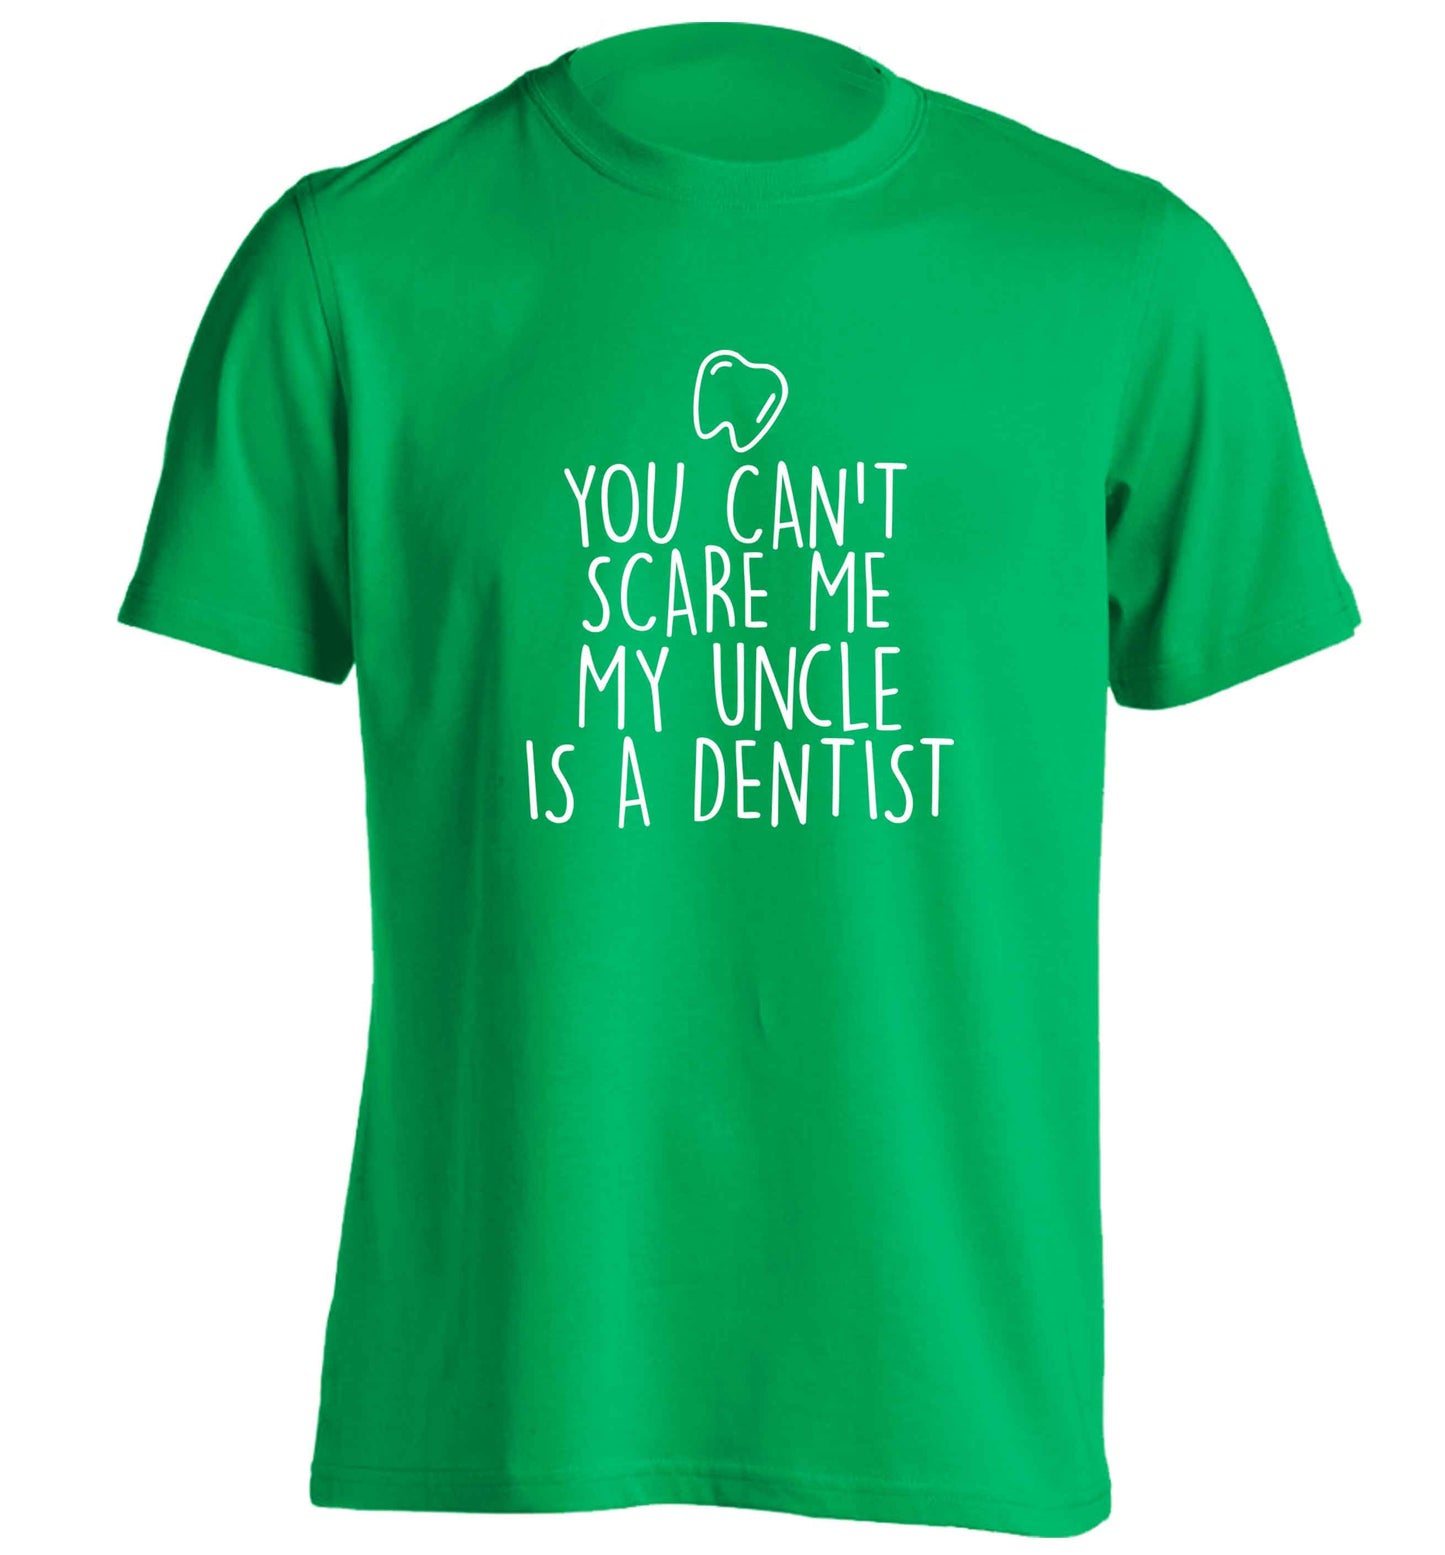 You can't scare me my uncle is a dentist adults unisex green Tshirt 2XL